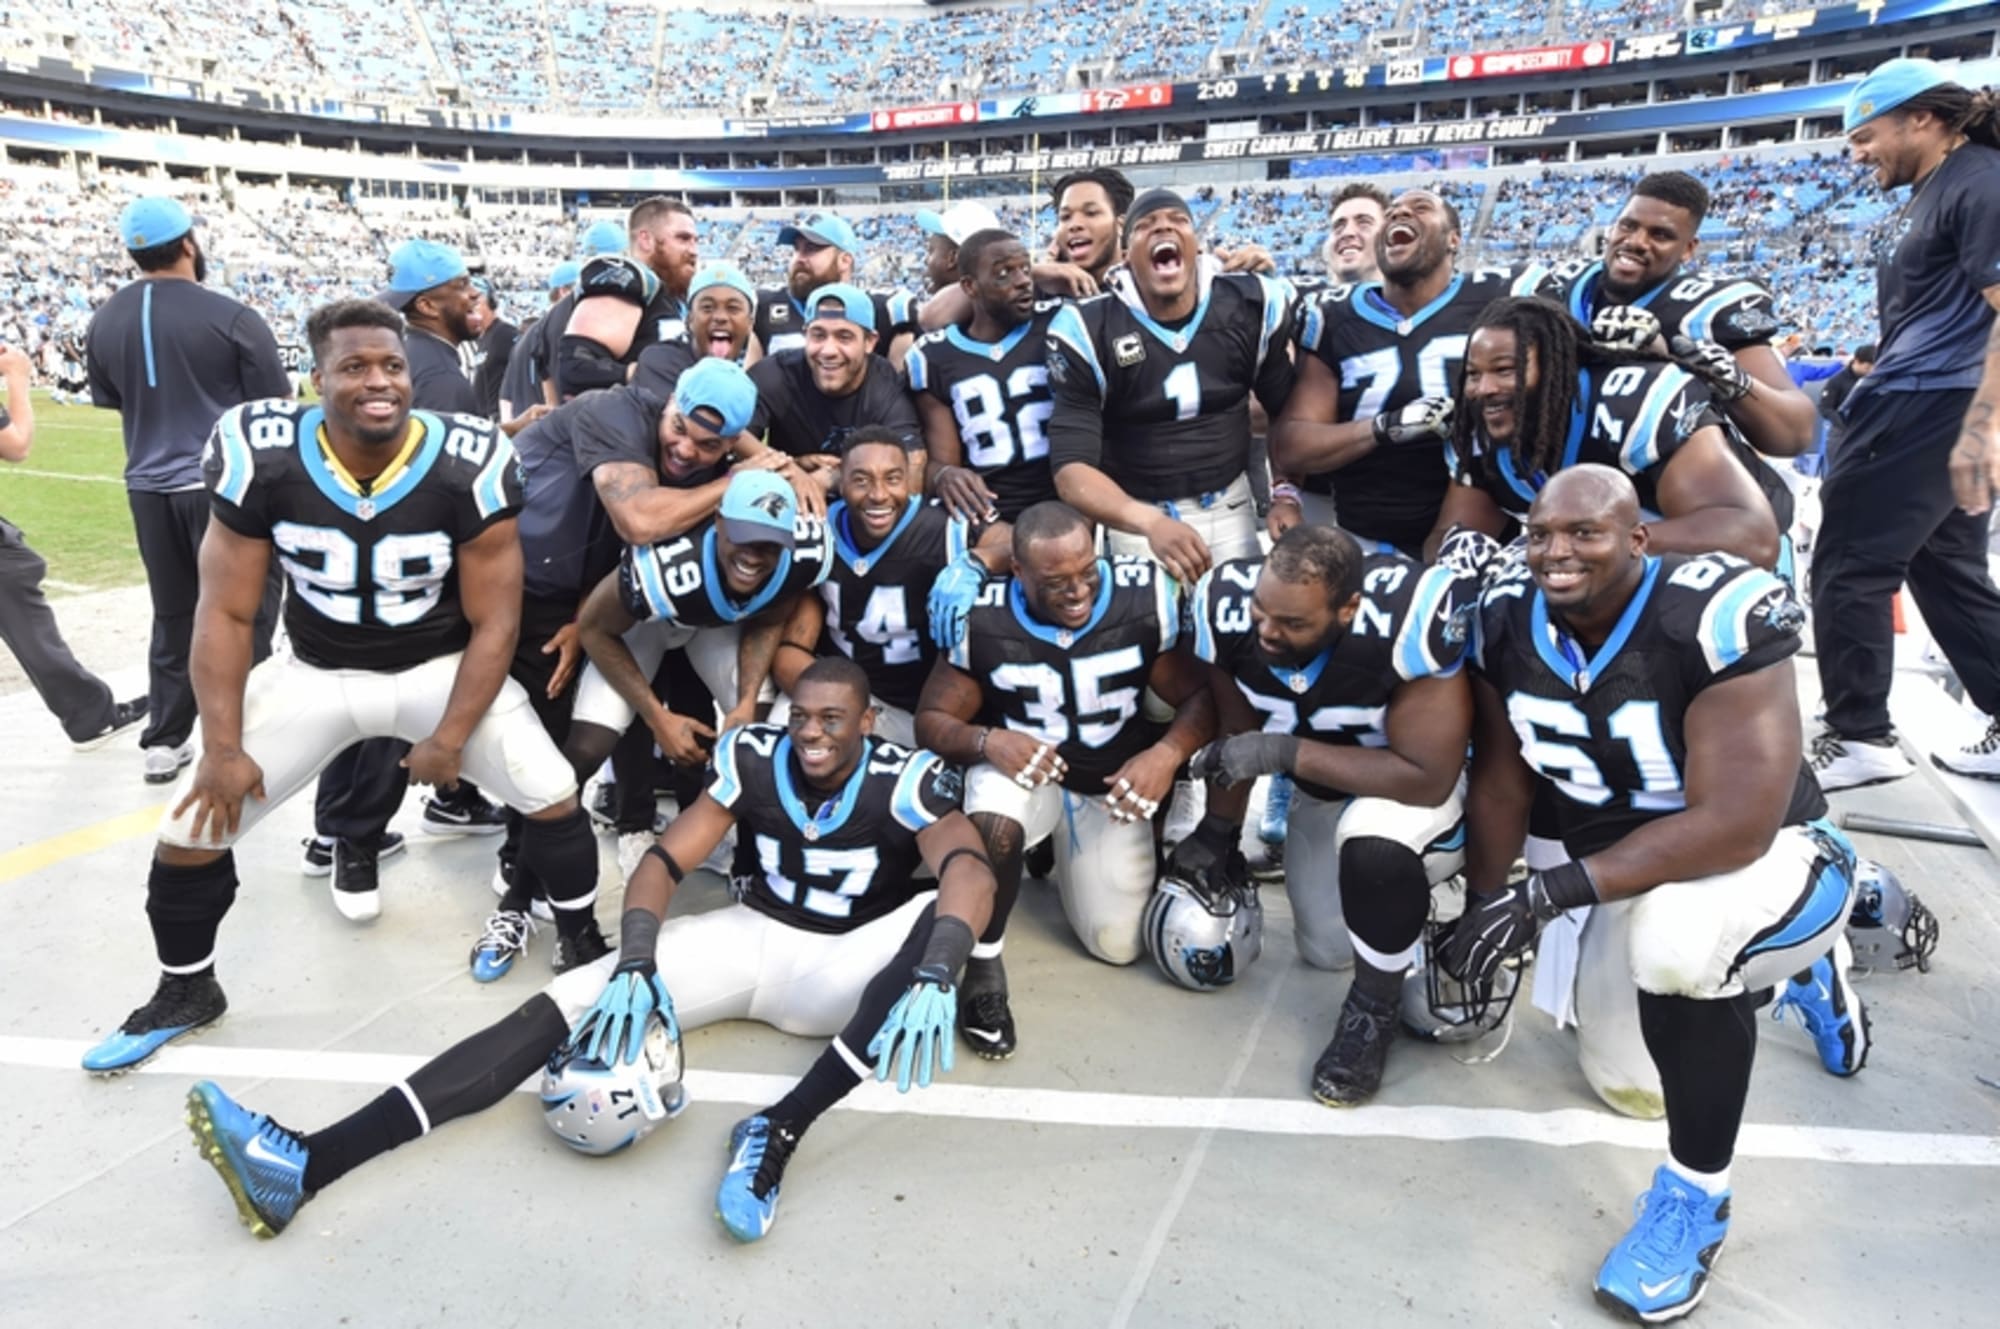 Carolina Panthers: We Must Appreciate What We Have